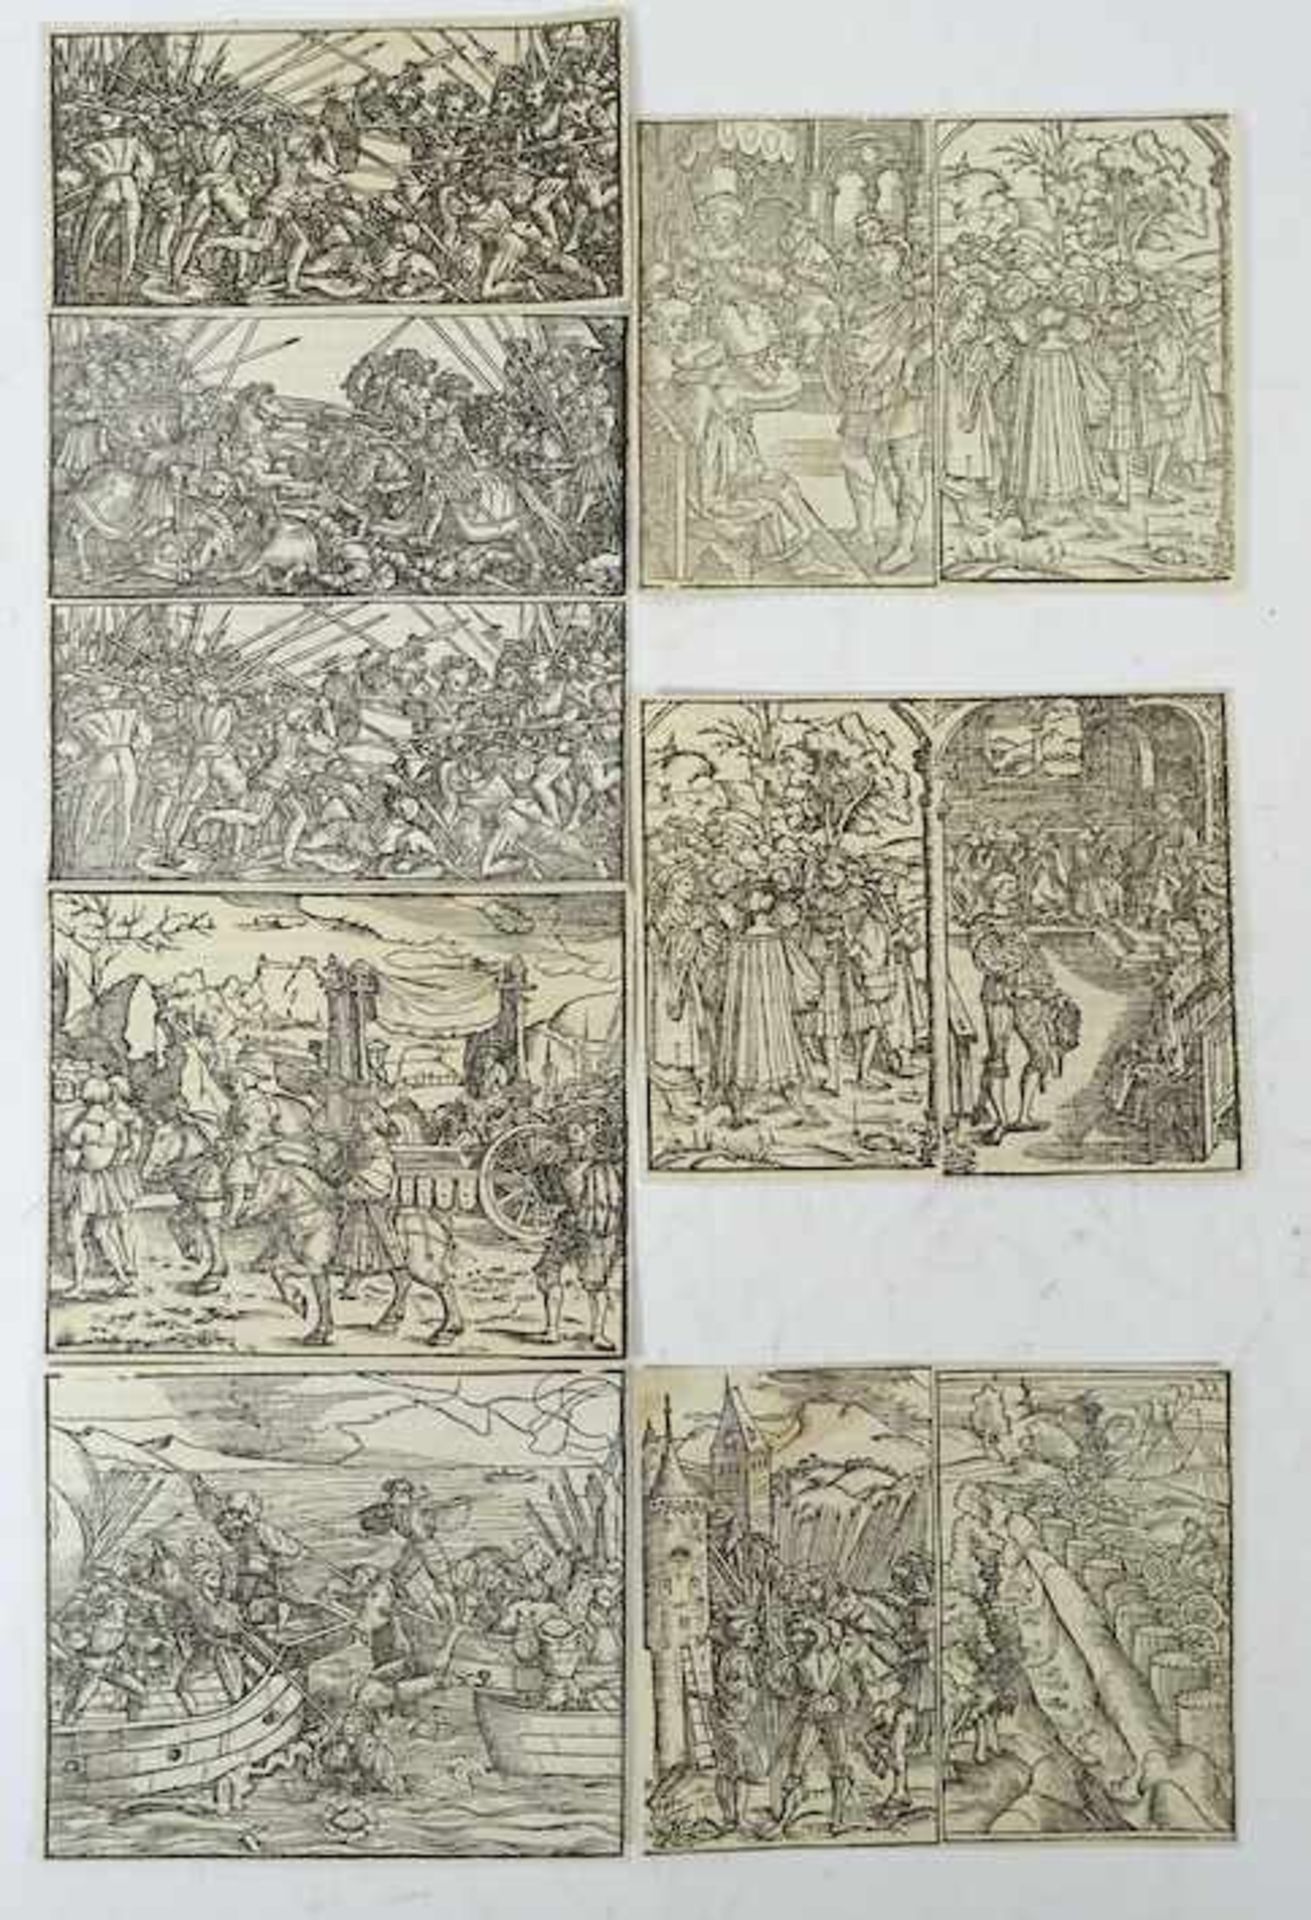 BOOK ILLUSTRATION -- COLLECTION of c. 50 woodcuts from 16th c. books, for the greater part taken